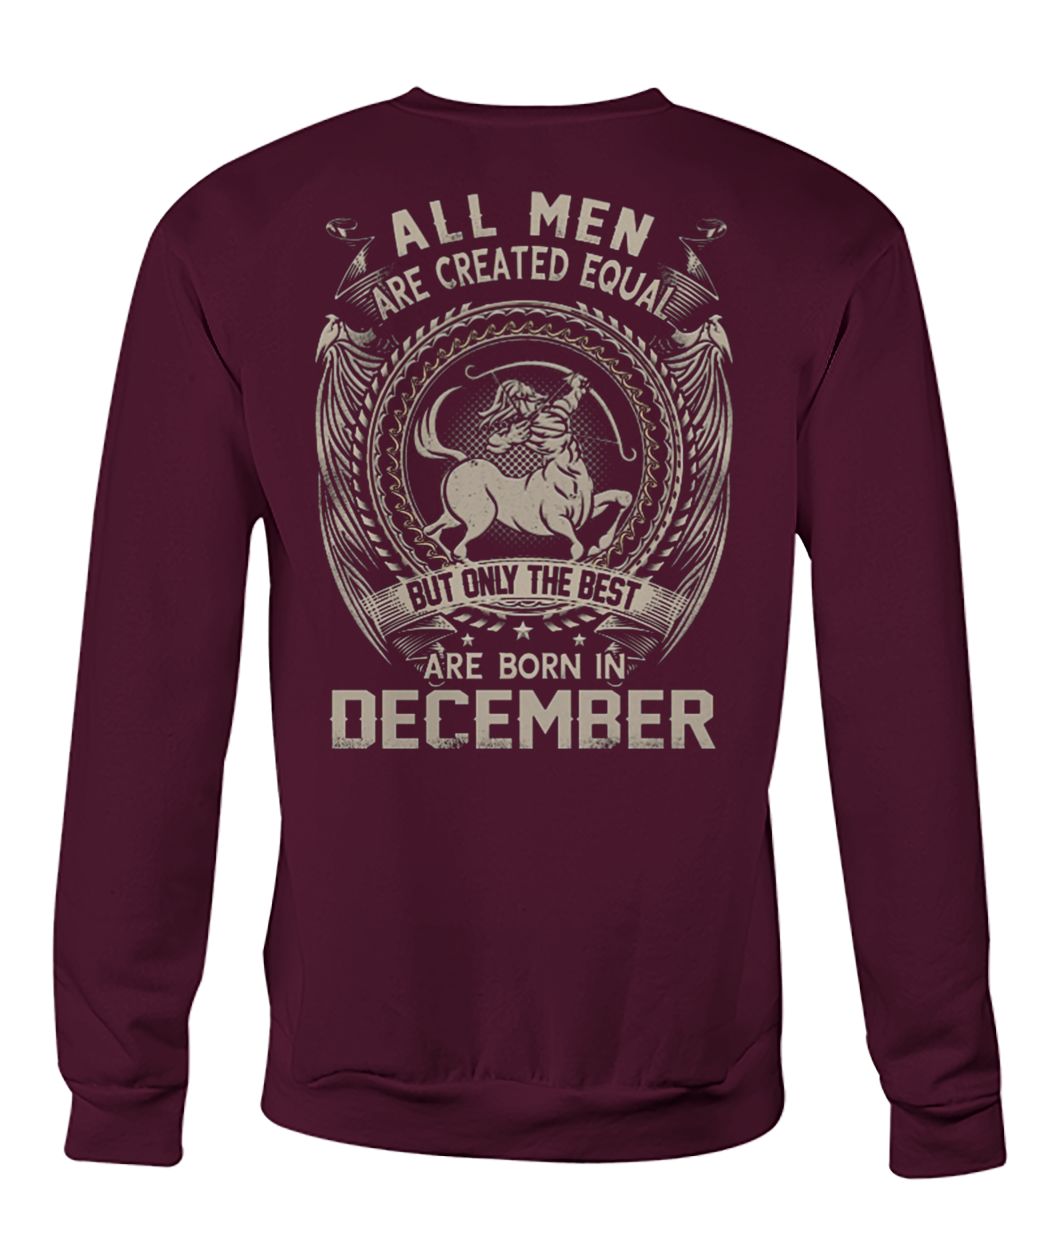 All men created equal but the best are born in december crew neck sweatshirt